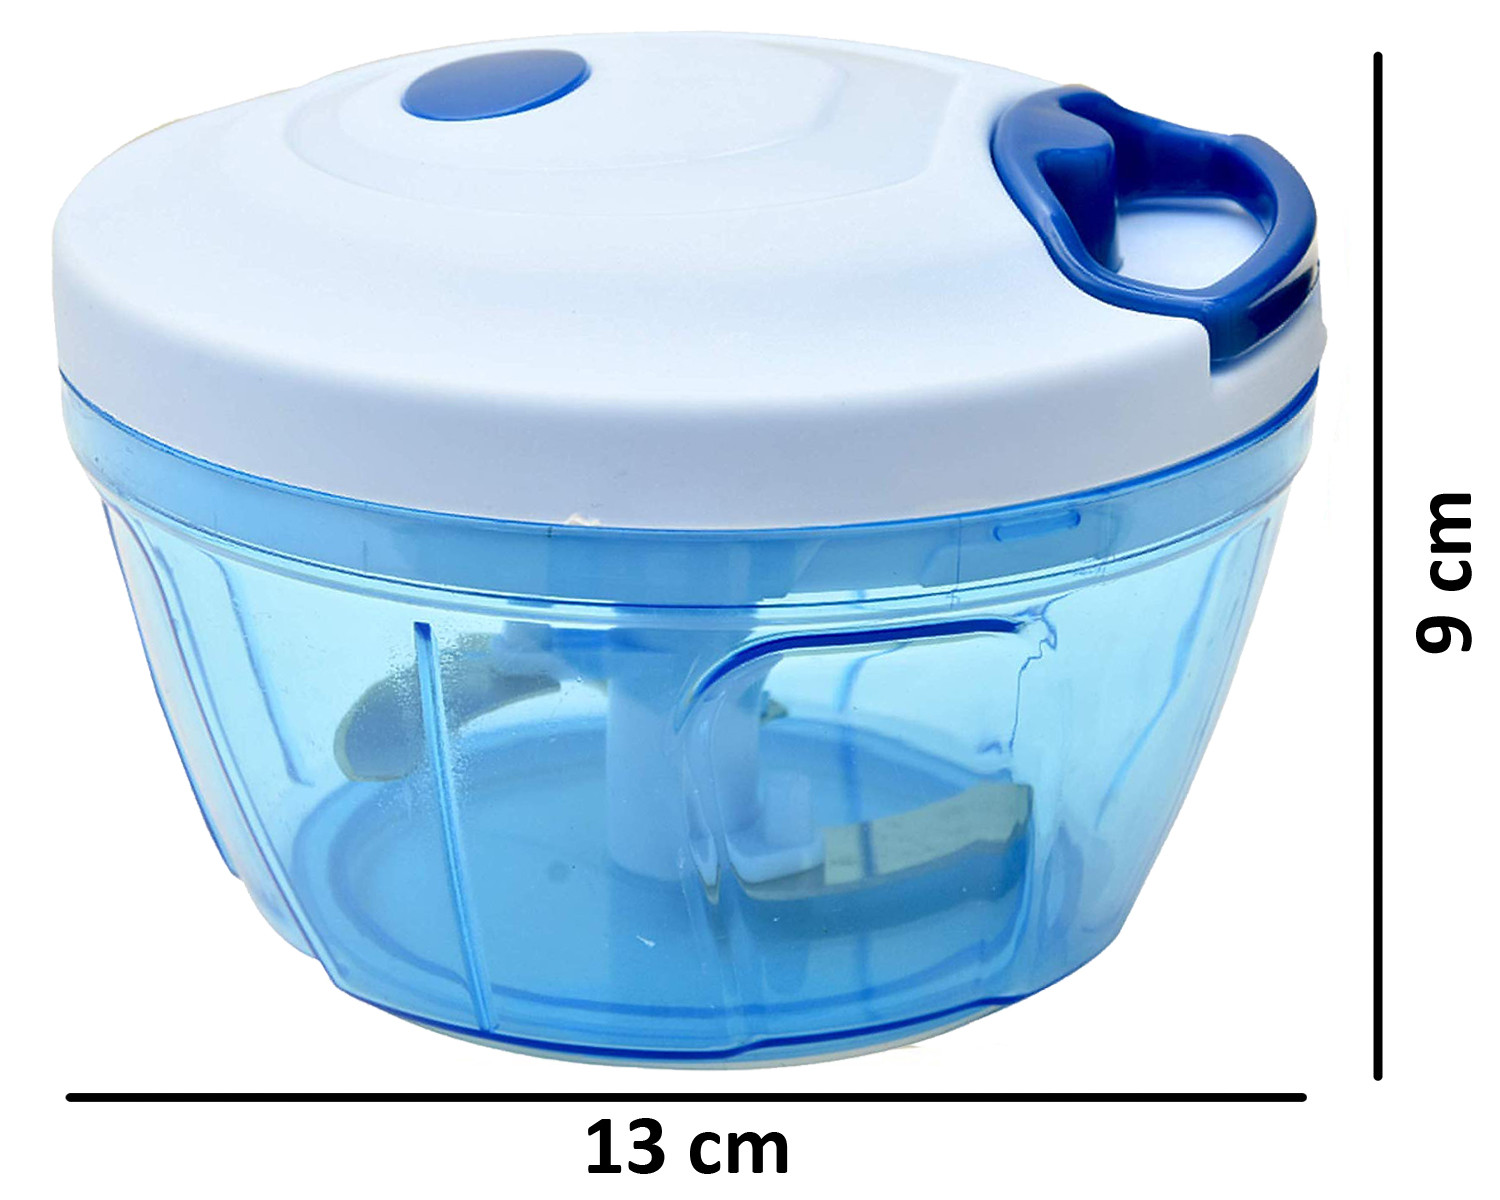 Kuber Industries Compact Vegetable Quick Chopper with 3 Blades,500 ML, (Blue)-KUBMART1326